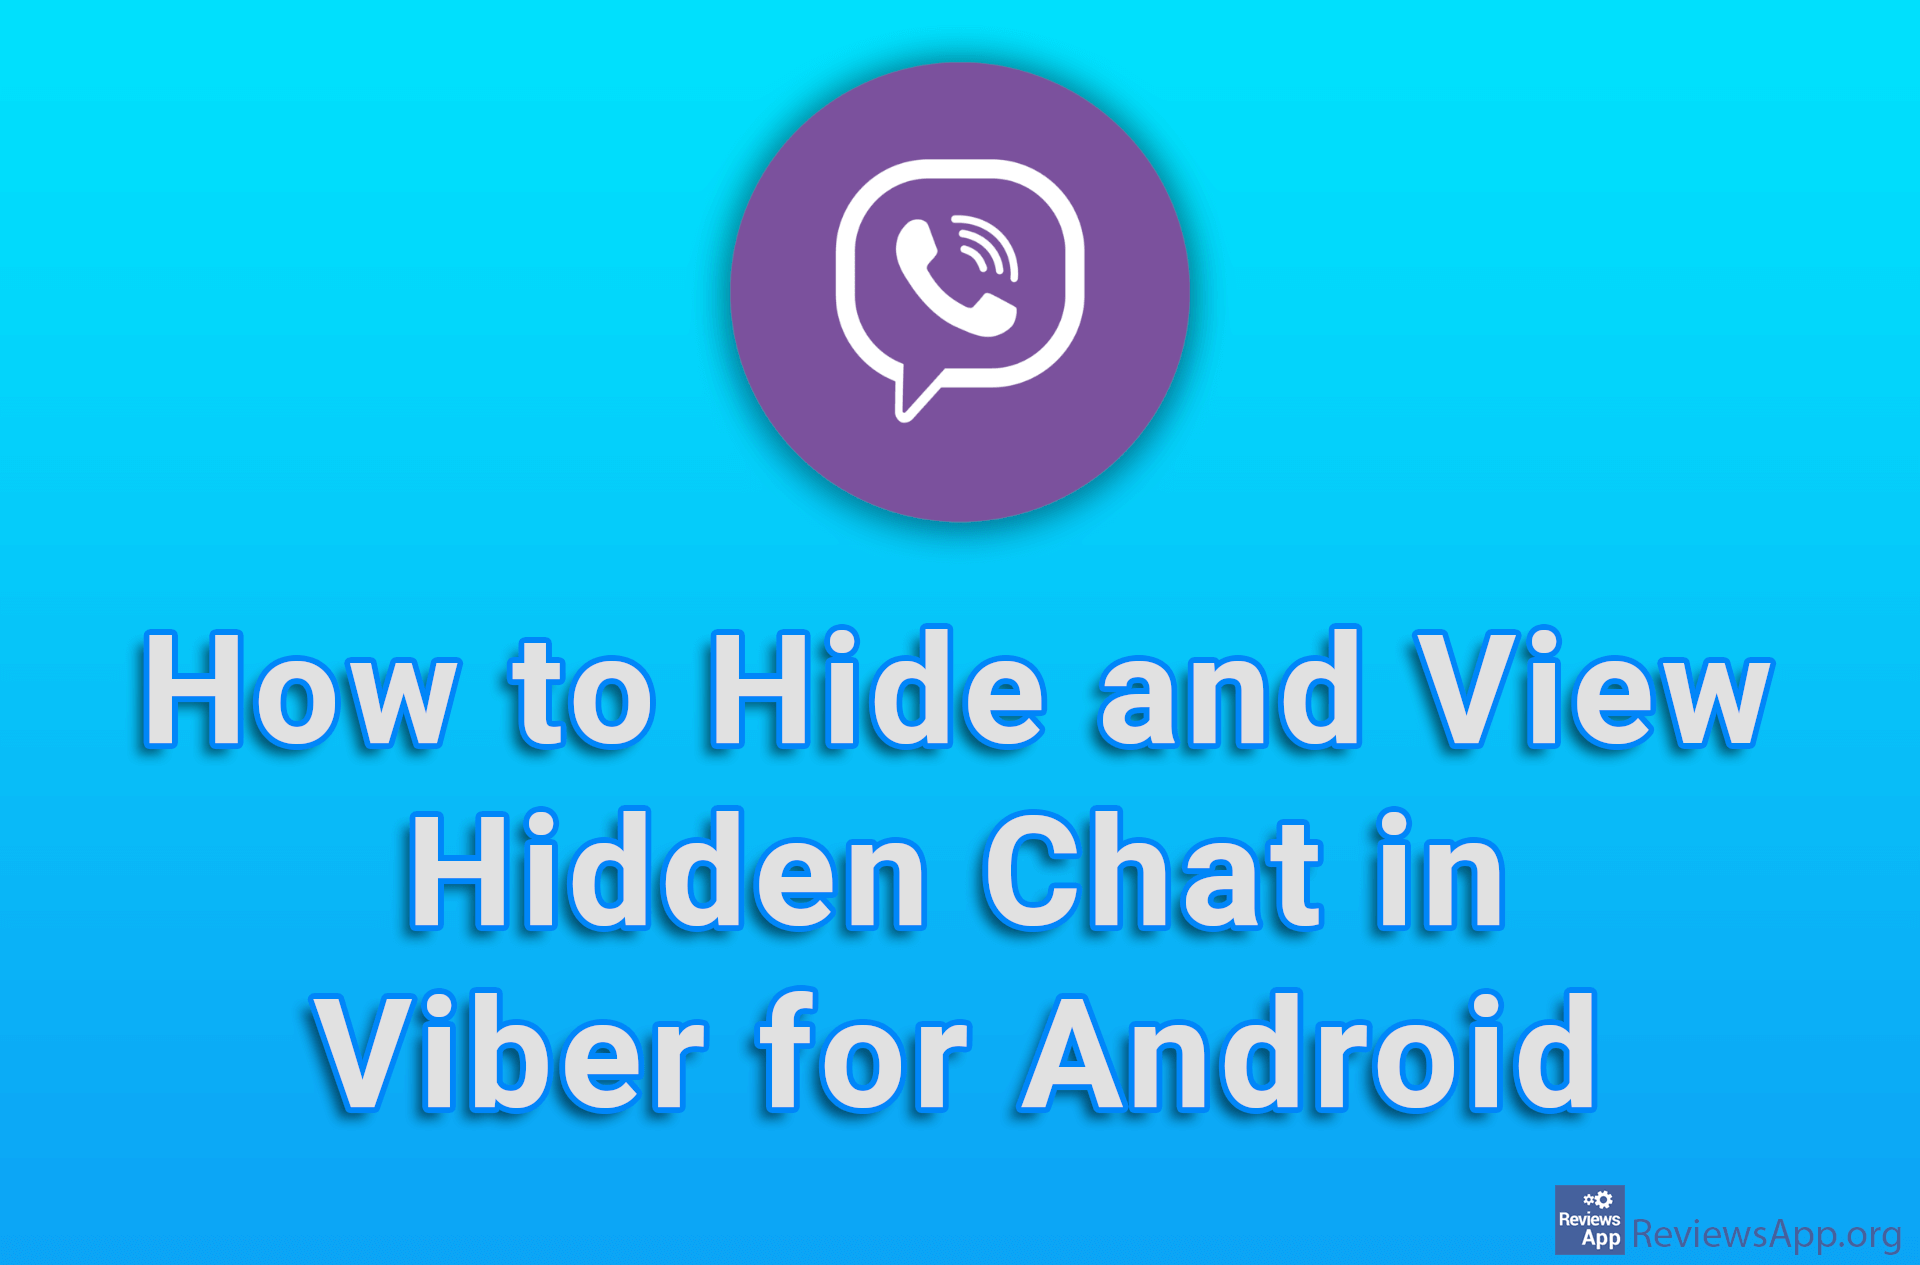 How to Hide and View Hidden Chat in Viber for Android